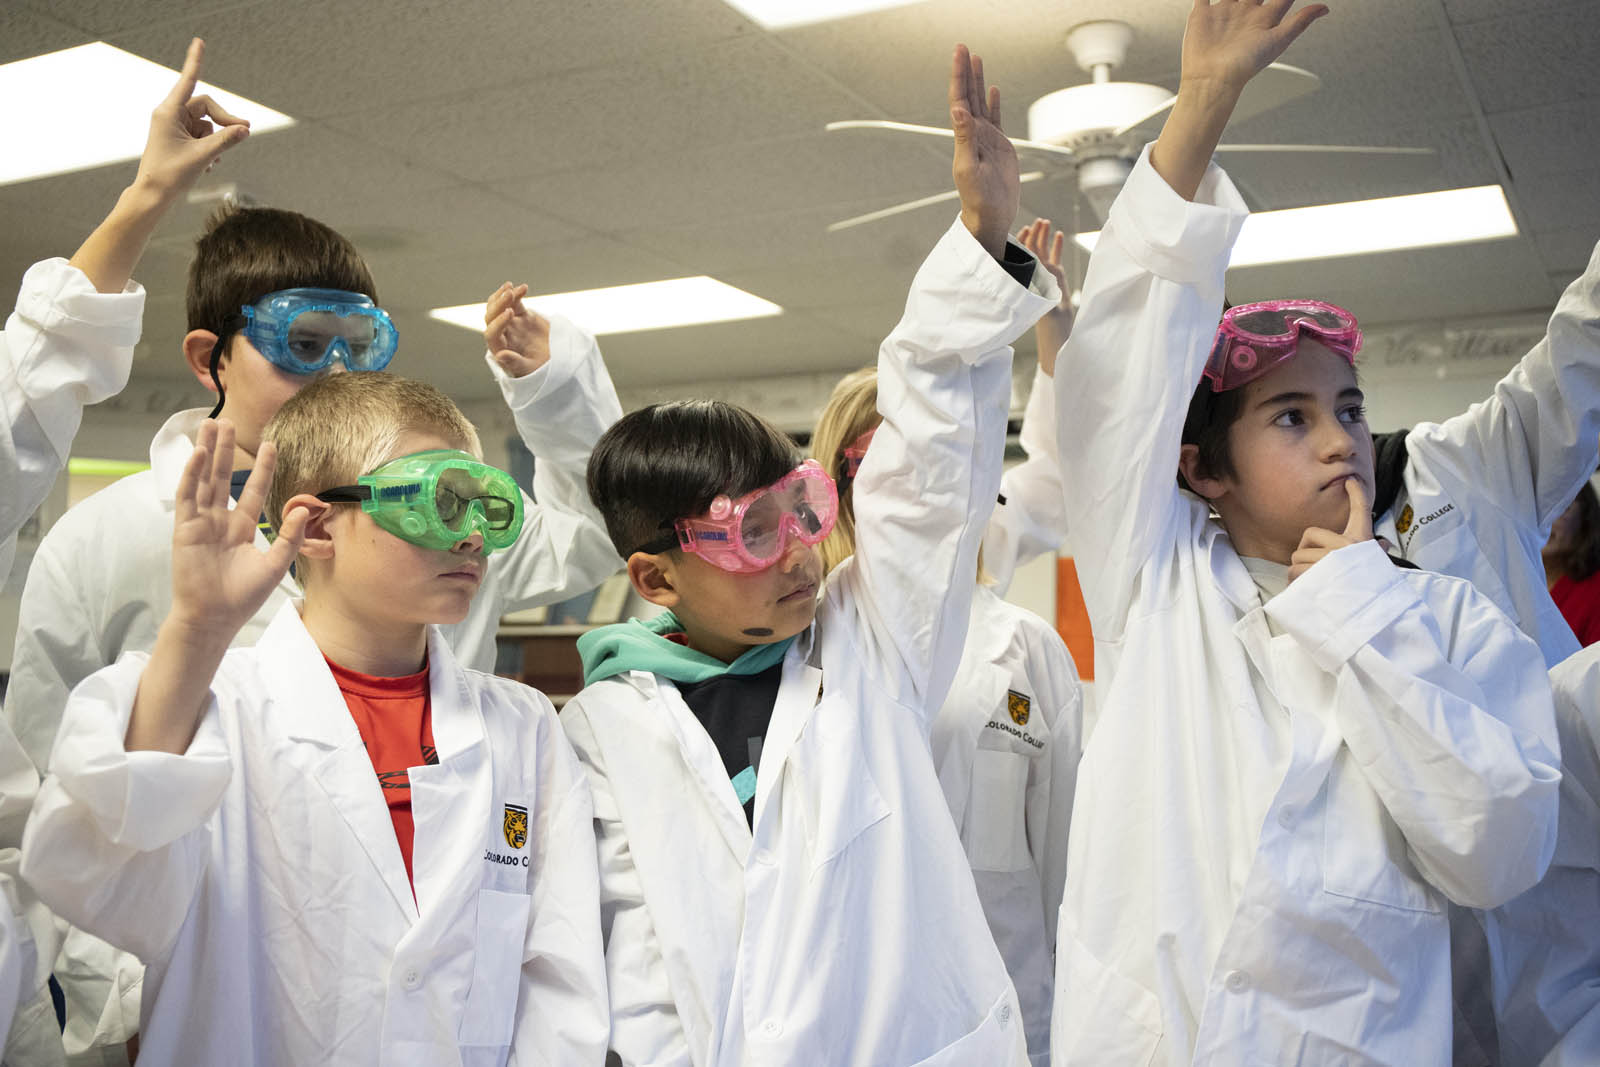 Fifth-graders at La Veta Elementary School raise their hands to make a hypothesis about the class experiment during a lesson taught by CC students. Photo by Jennifer Coombes.